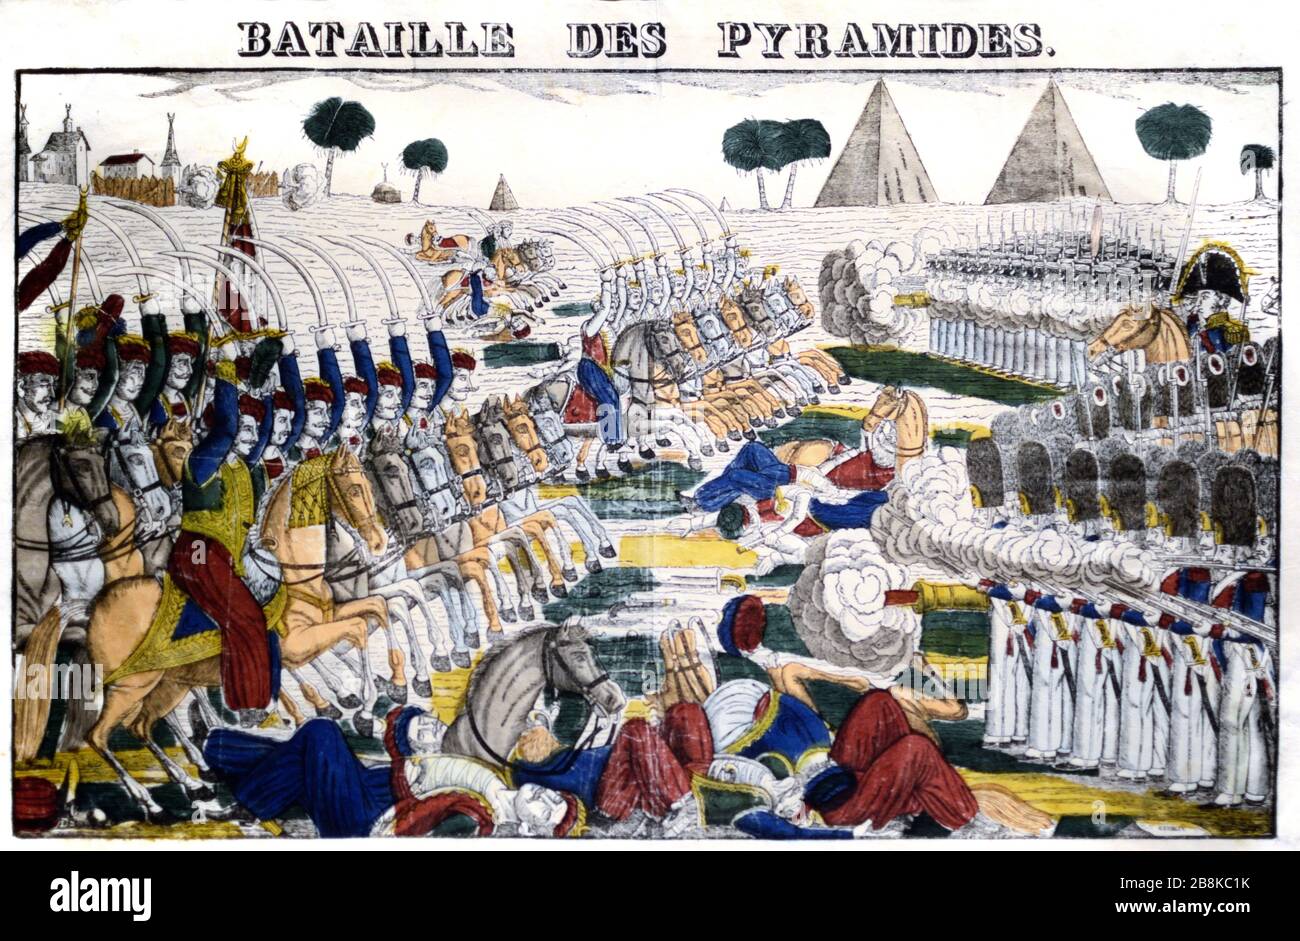 Battle of the Pyramids Egypt (1798) aka the Battle of Embabeh during the French Invasion of Egypt under Napoleon Bonaparte. The battle formed part of the French Revolutionary Wars and was a decisive French Victory against the Ottoman Army. c19th Engraving. Stock Photo